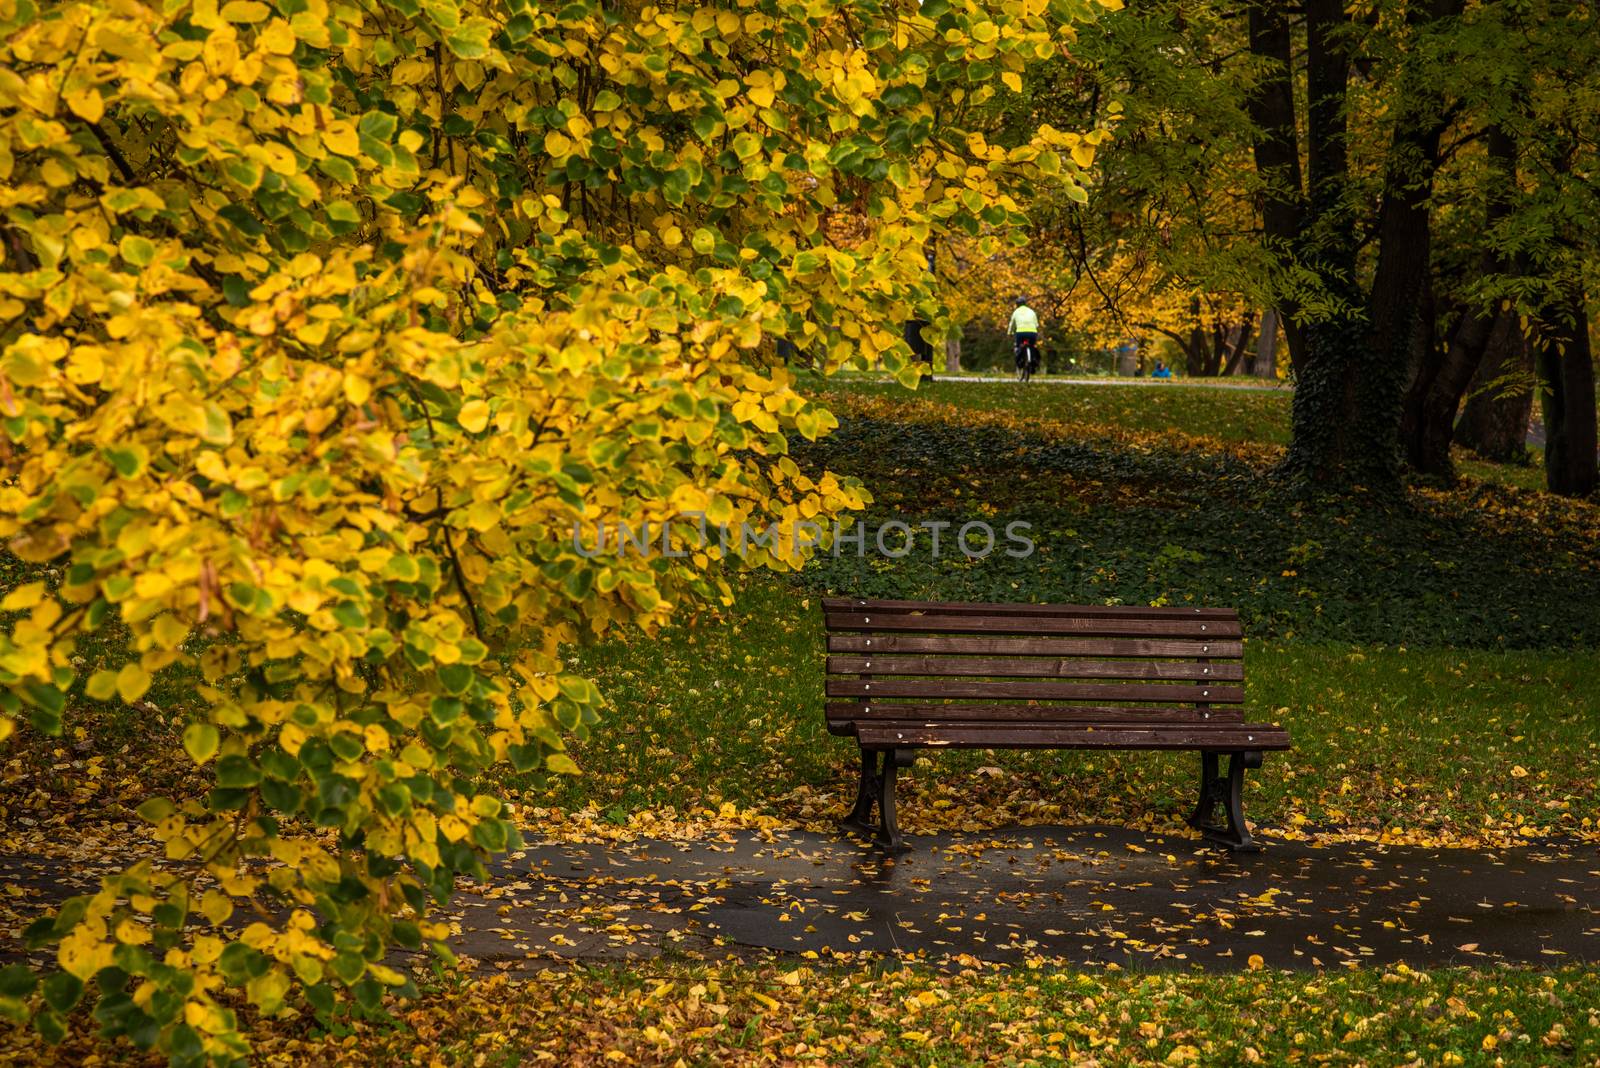 Empty wooden bench in a park surrounded with yellow leaves by gonzalobell